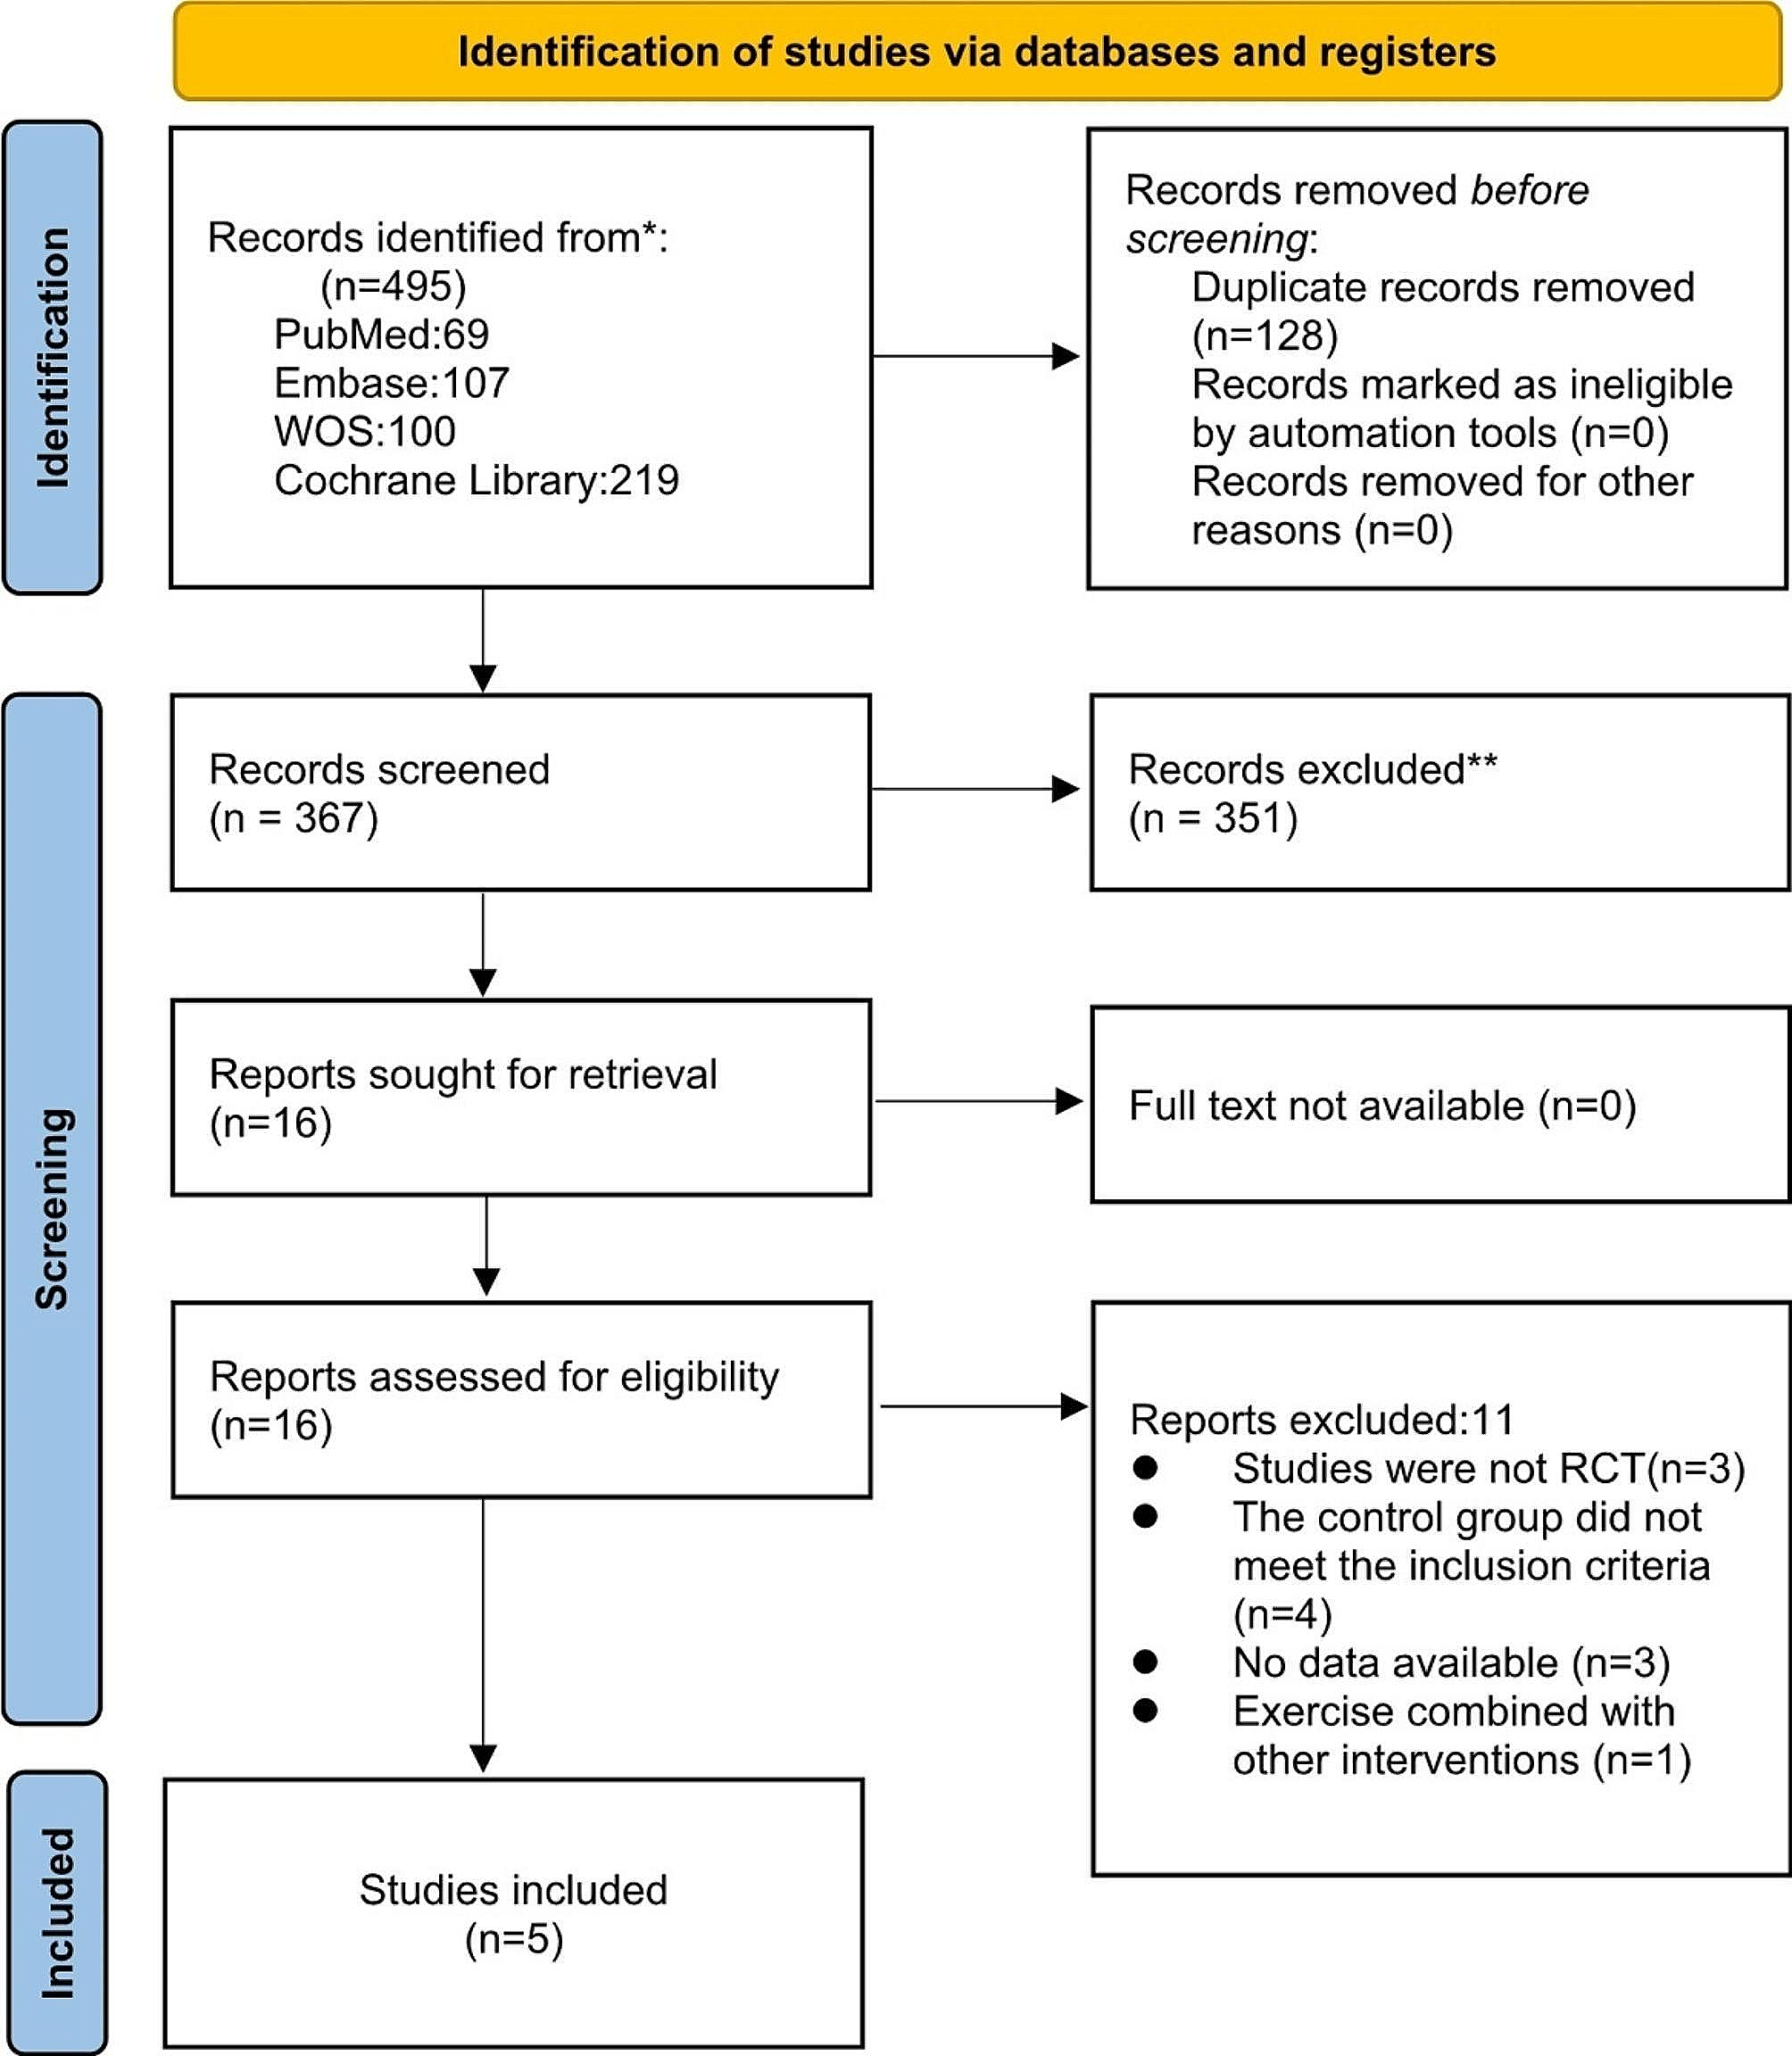 Effect of exercise training on heath, quality of life, exercise capacity in juvenile idiopathic arthritis: a meta-analysis of randomized controlled trials